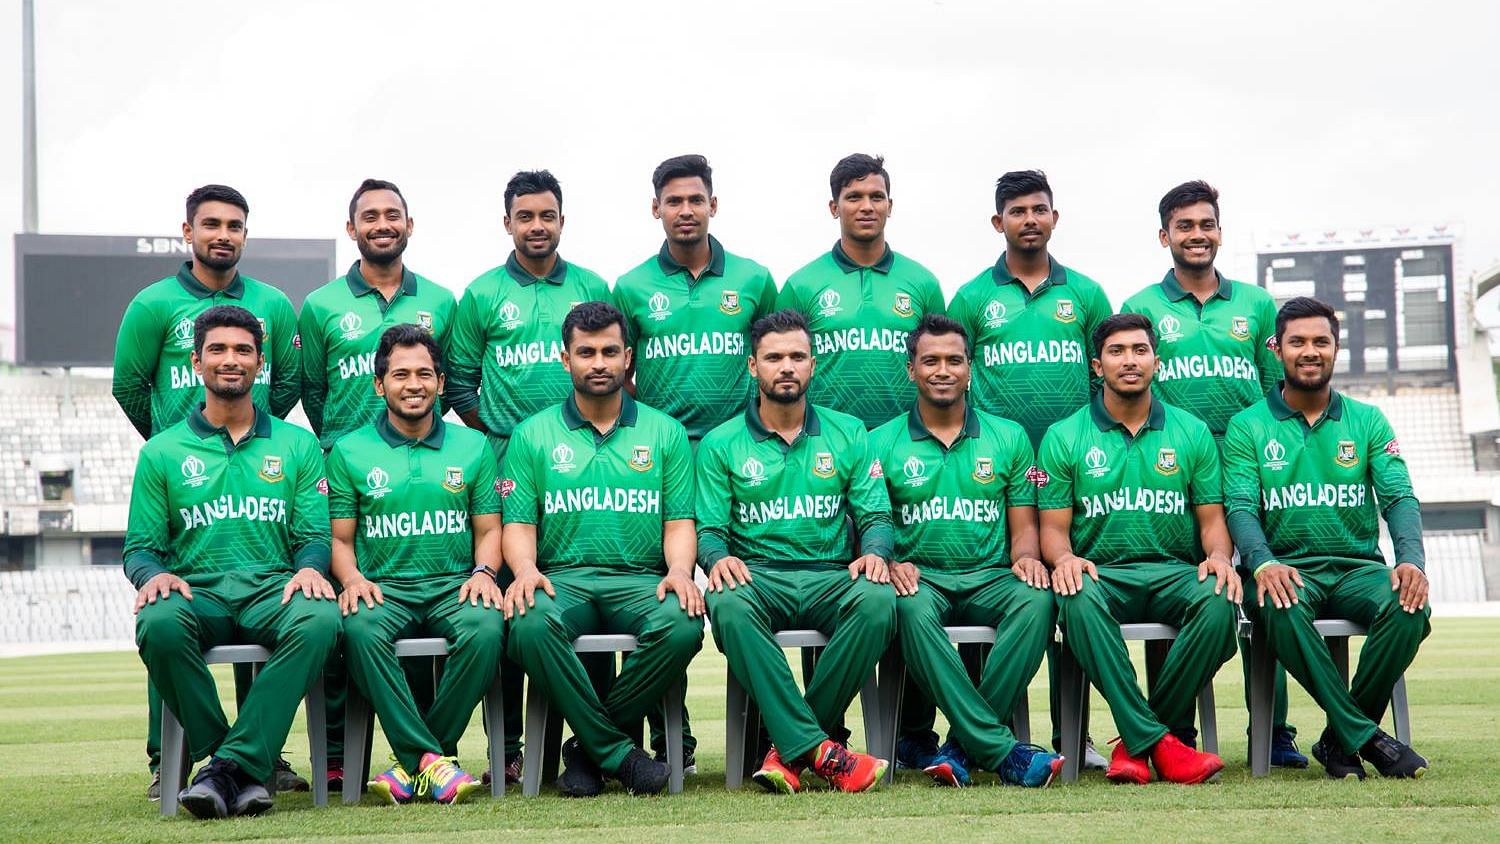 The Bangladesh Cricket team has been forced to change their World Cup jersey following fan backlash.